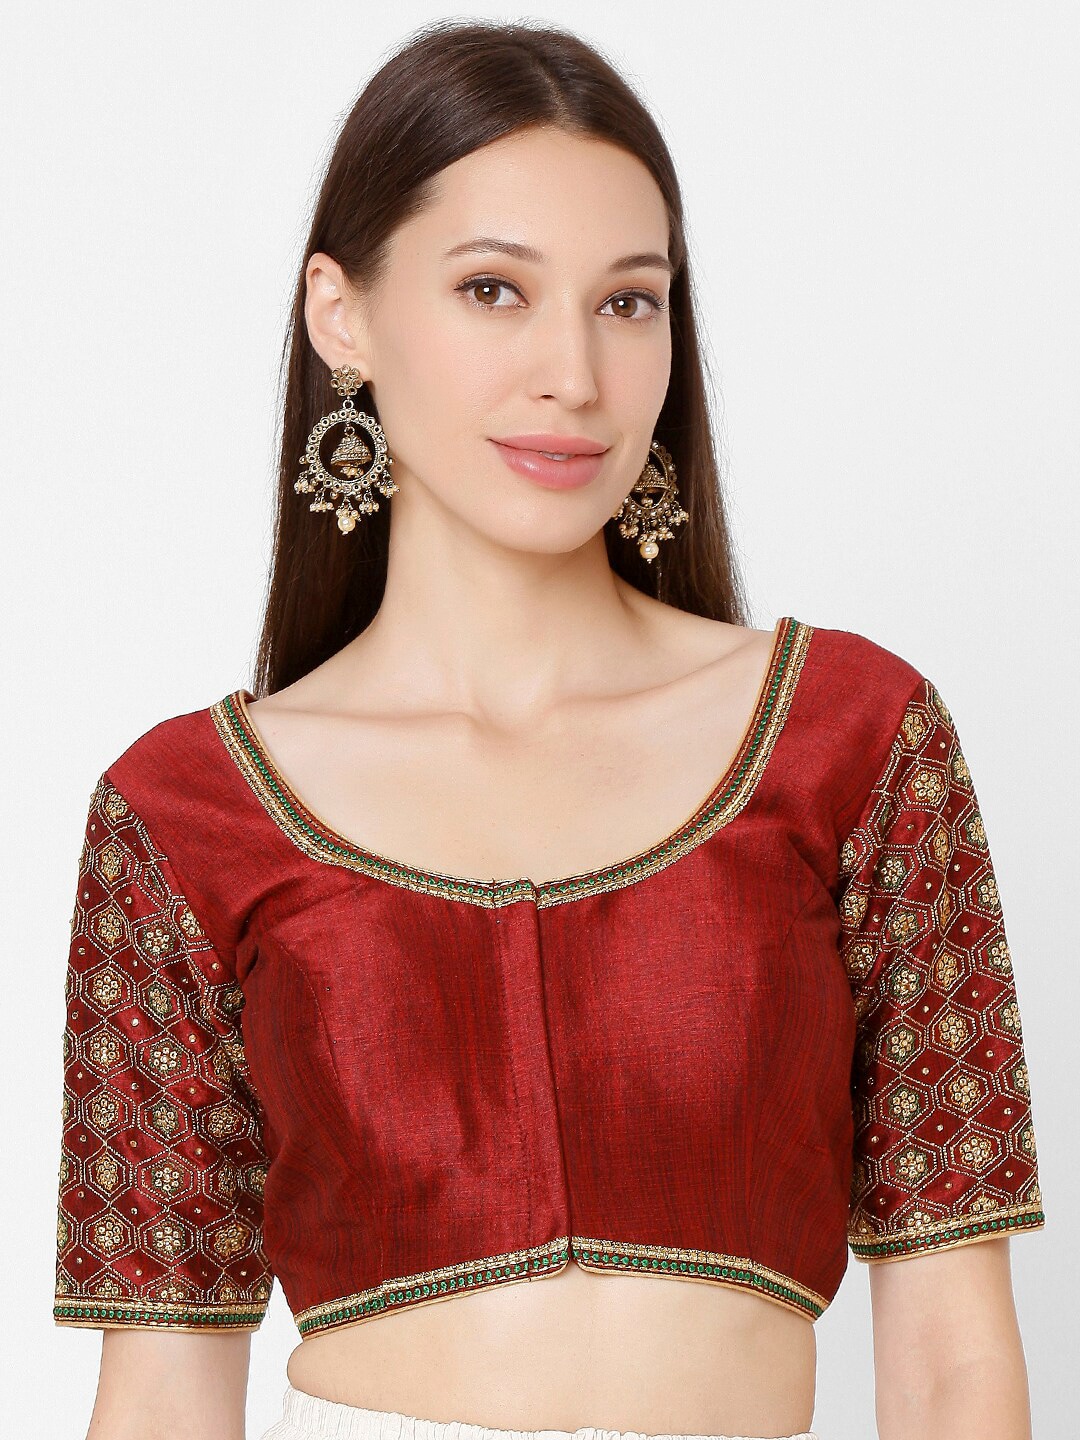 SALWAR STUDIO Maroon & Gold-coloured Embroidered Readymade Saree Blouse Price in India